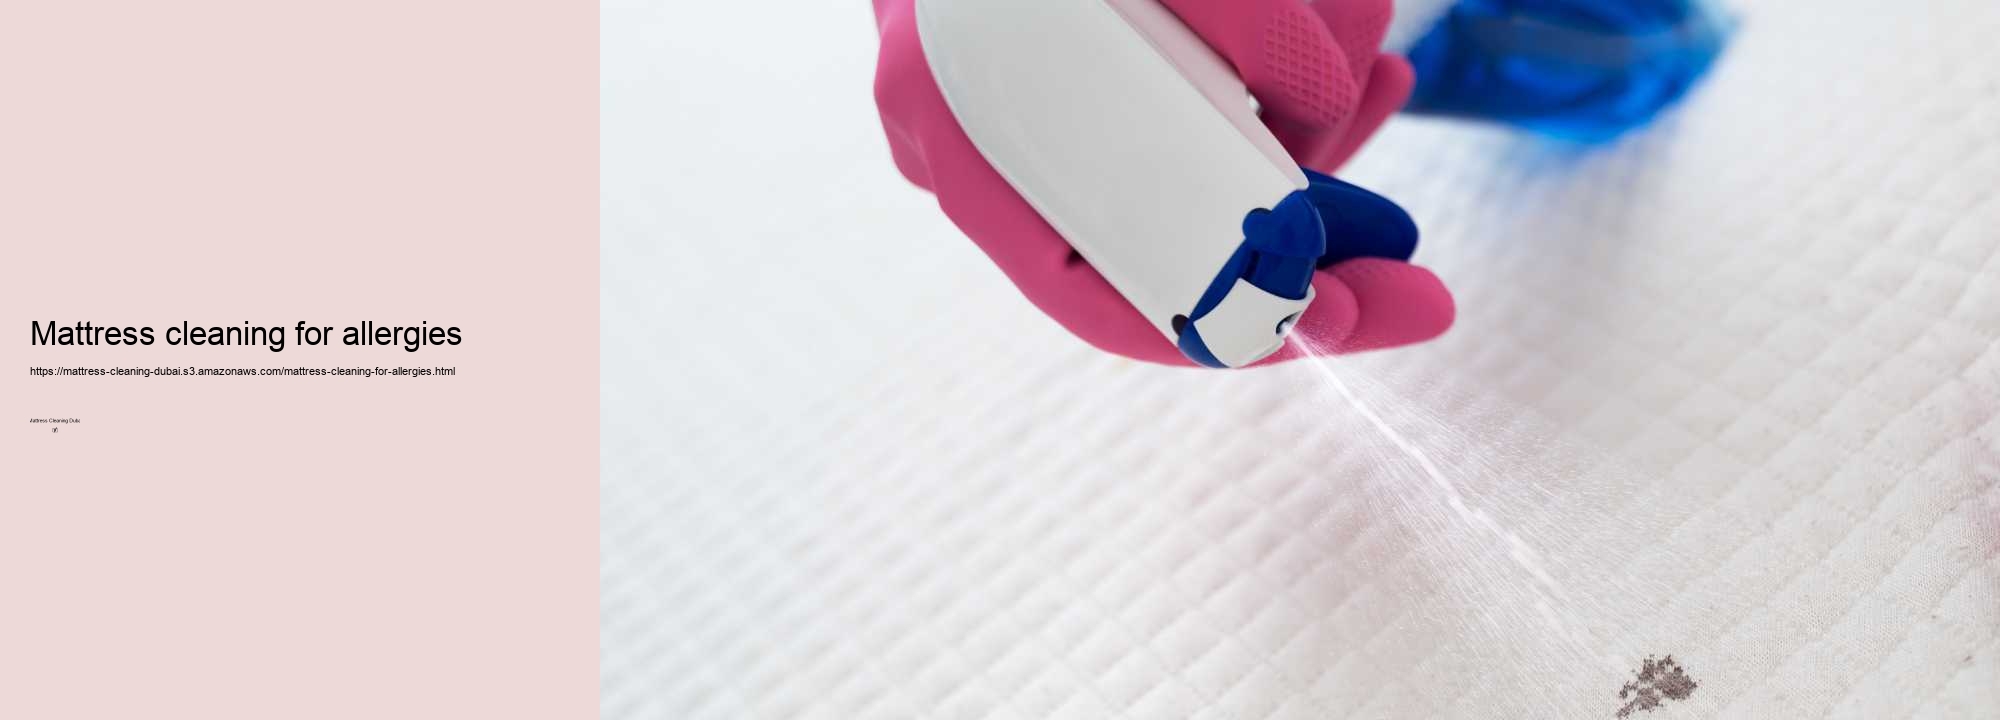 Discover How a Professionally Cleaned Mattress Can Improve Your Sleep in Dubai